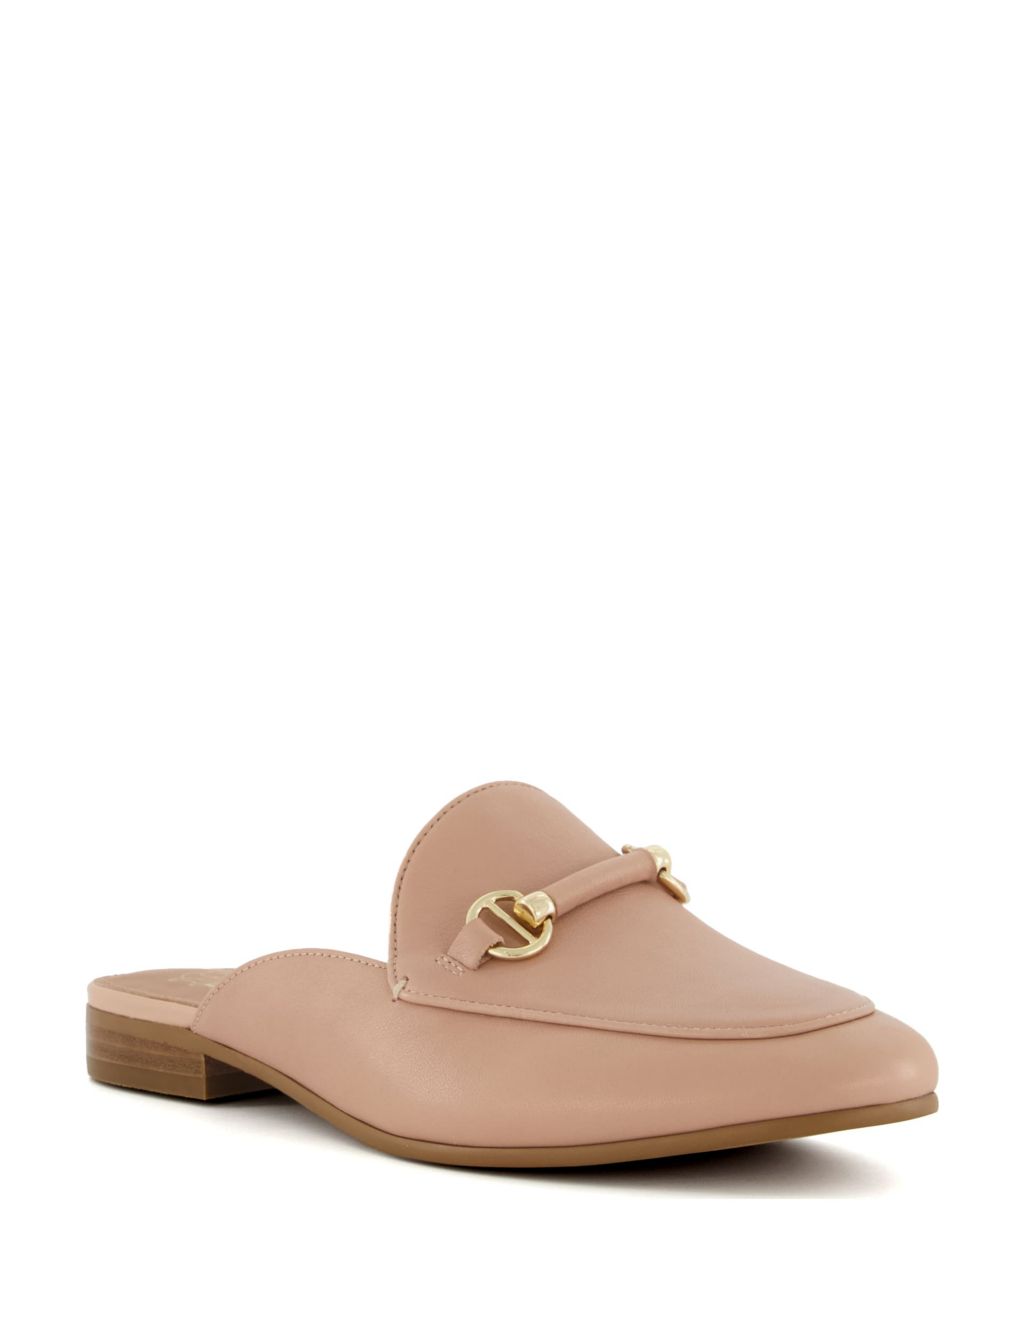 Leather Ring Detail Flat Loafers image 2